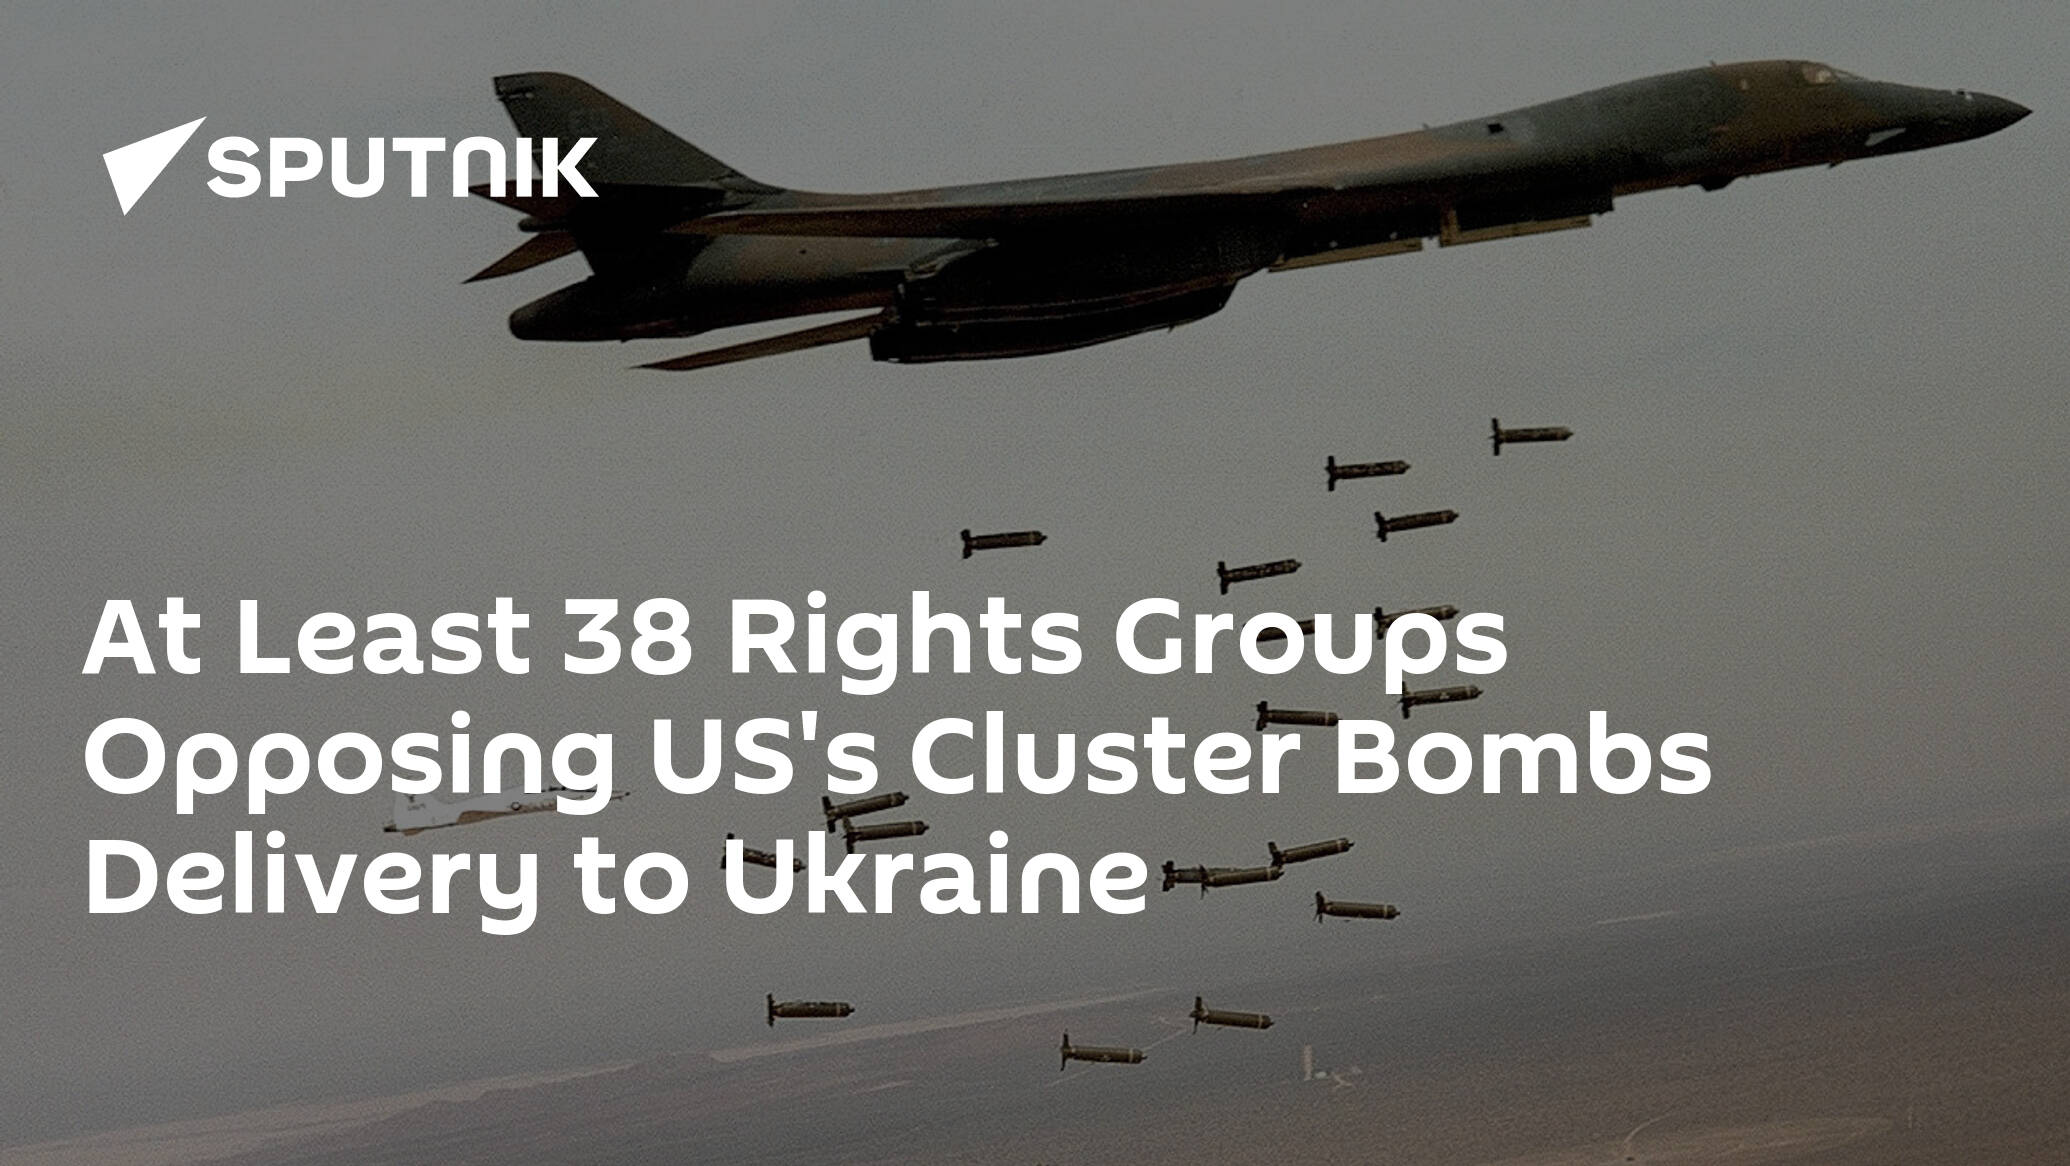 At Least 38 Rights Groups Opposing US's Cluster Bombs Delivery to Ukraine